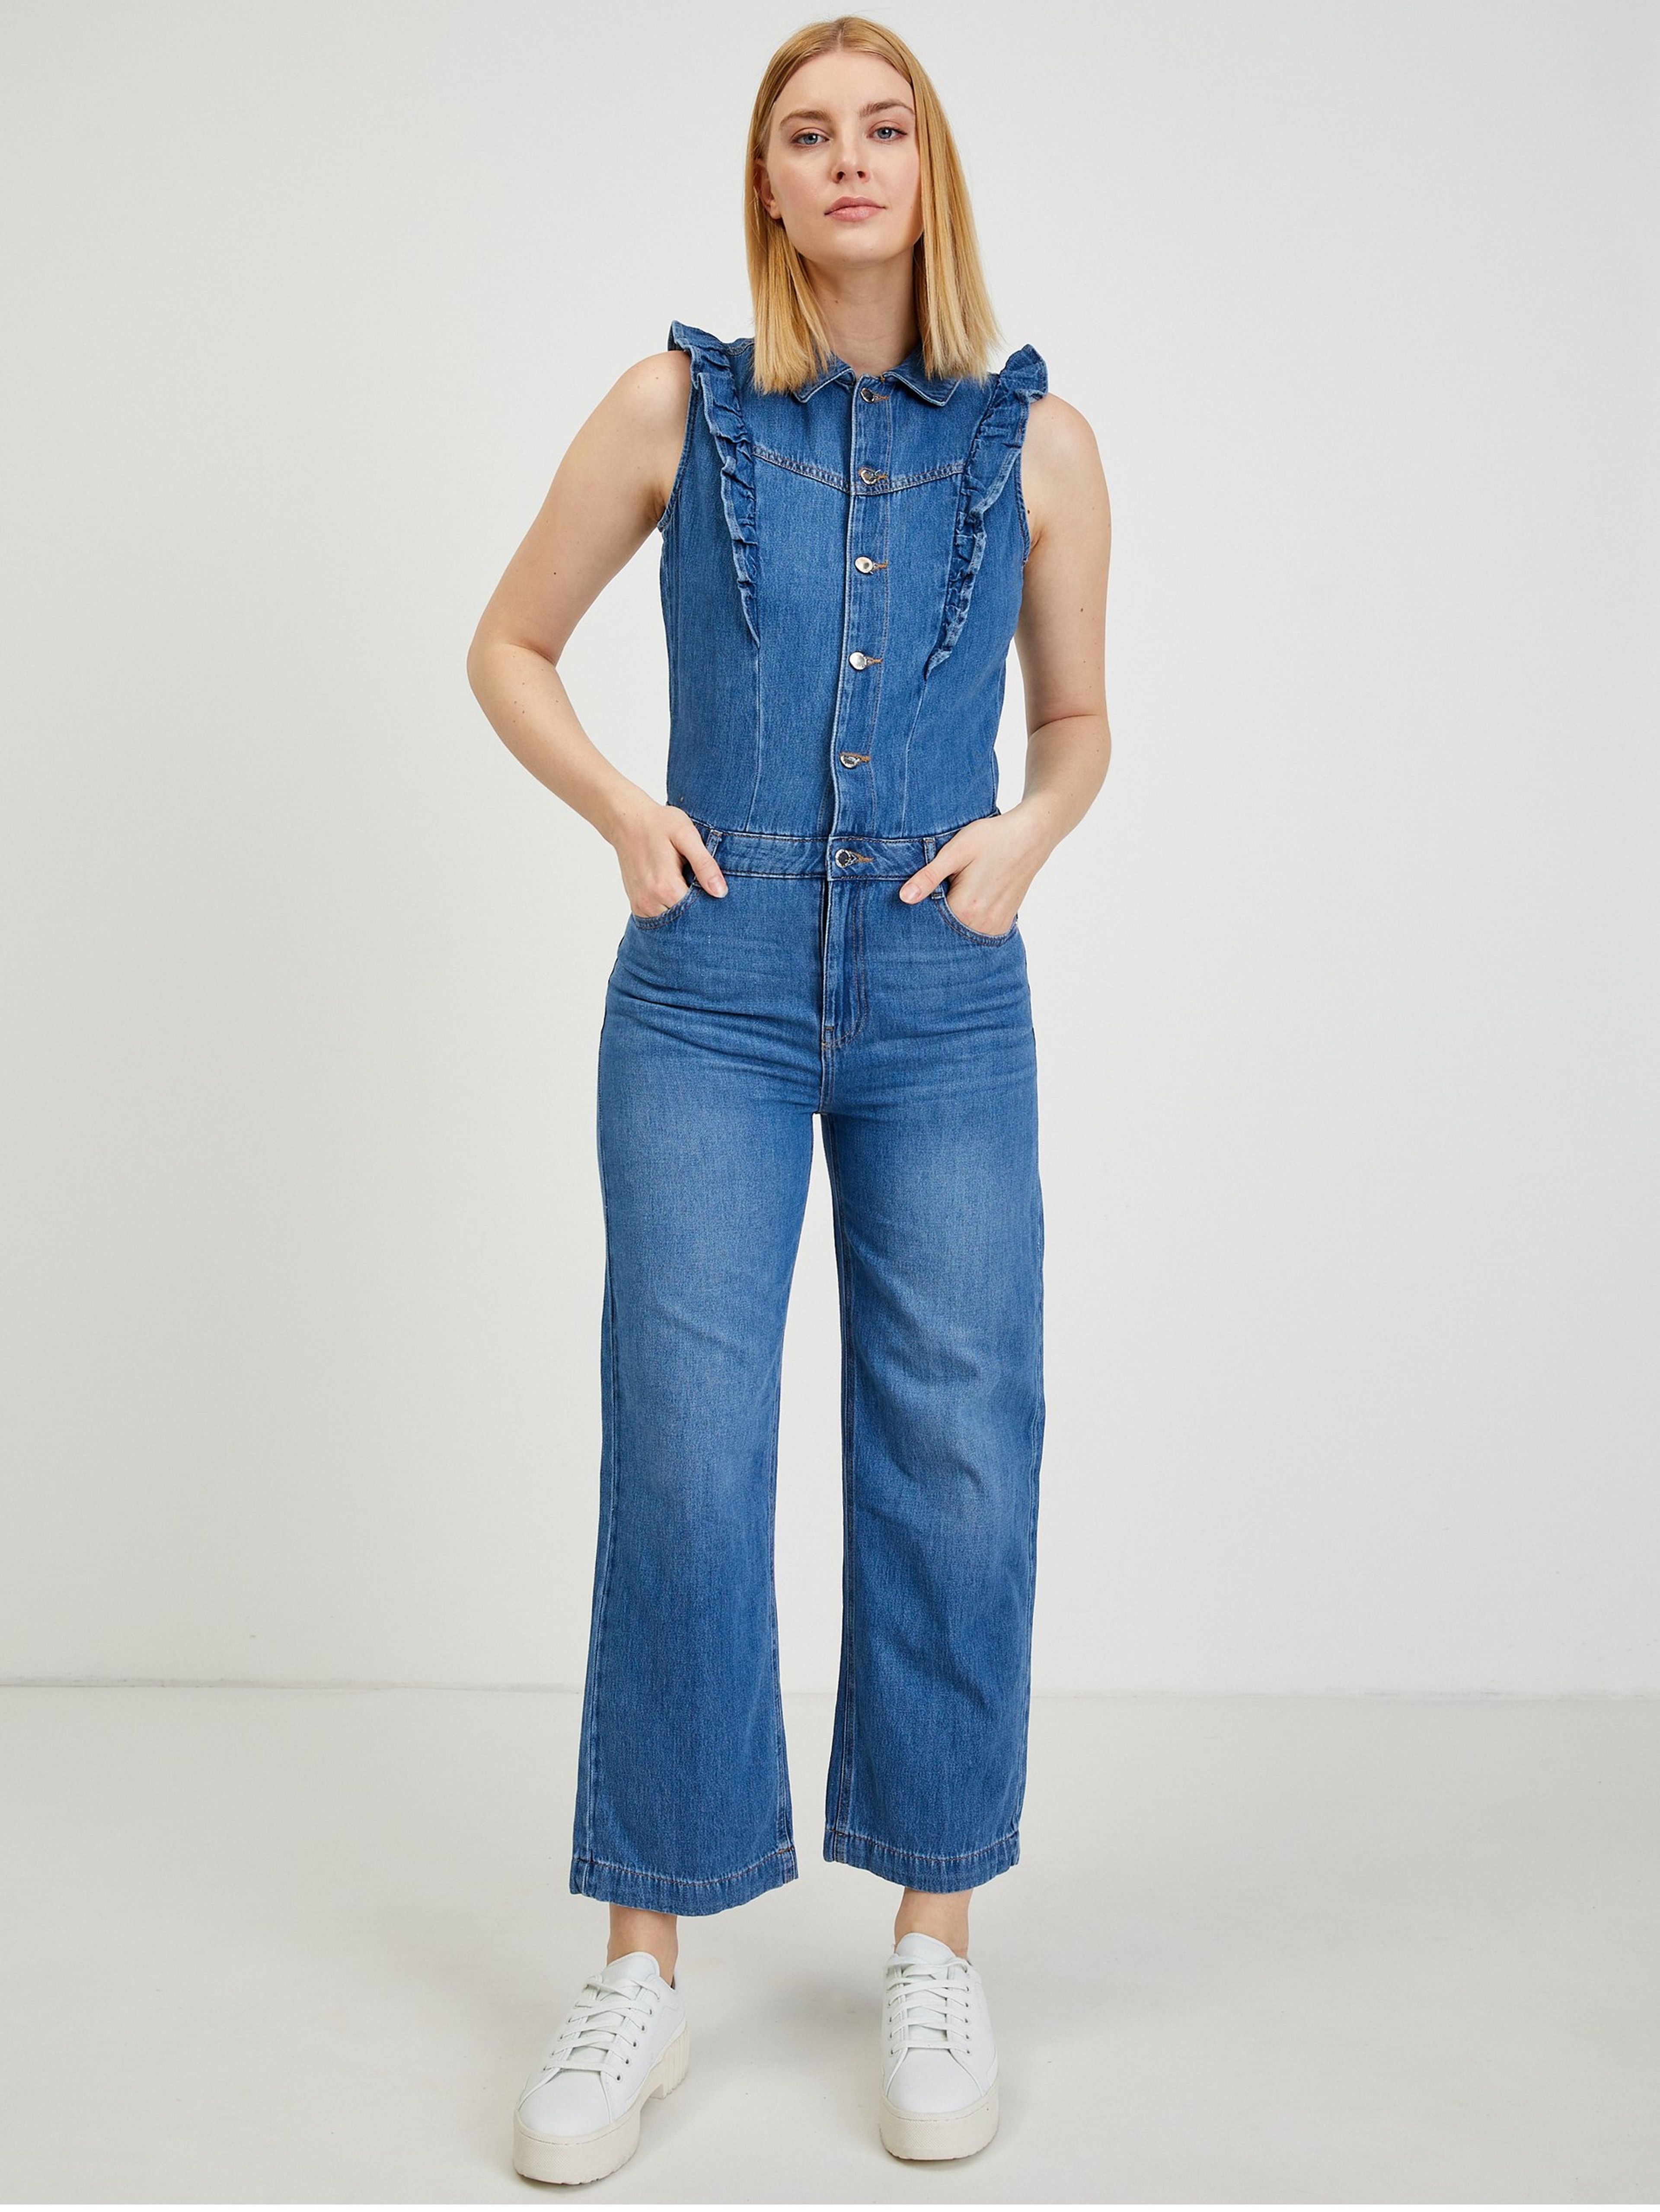 Blauer Jeans Overall ORSAY